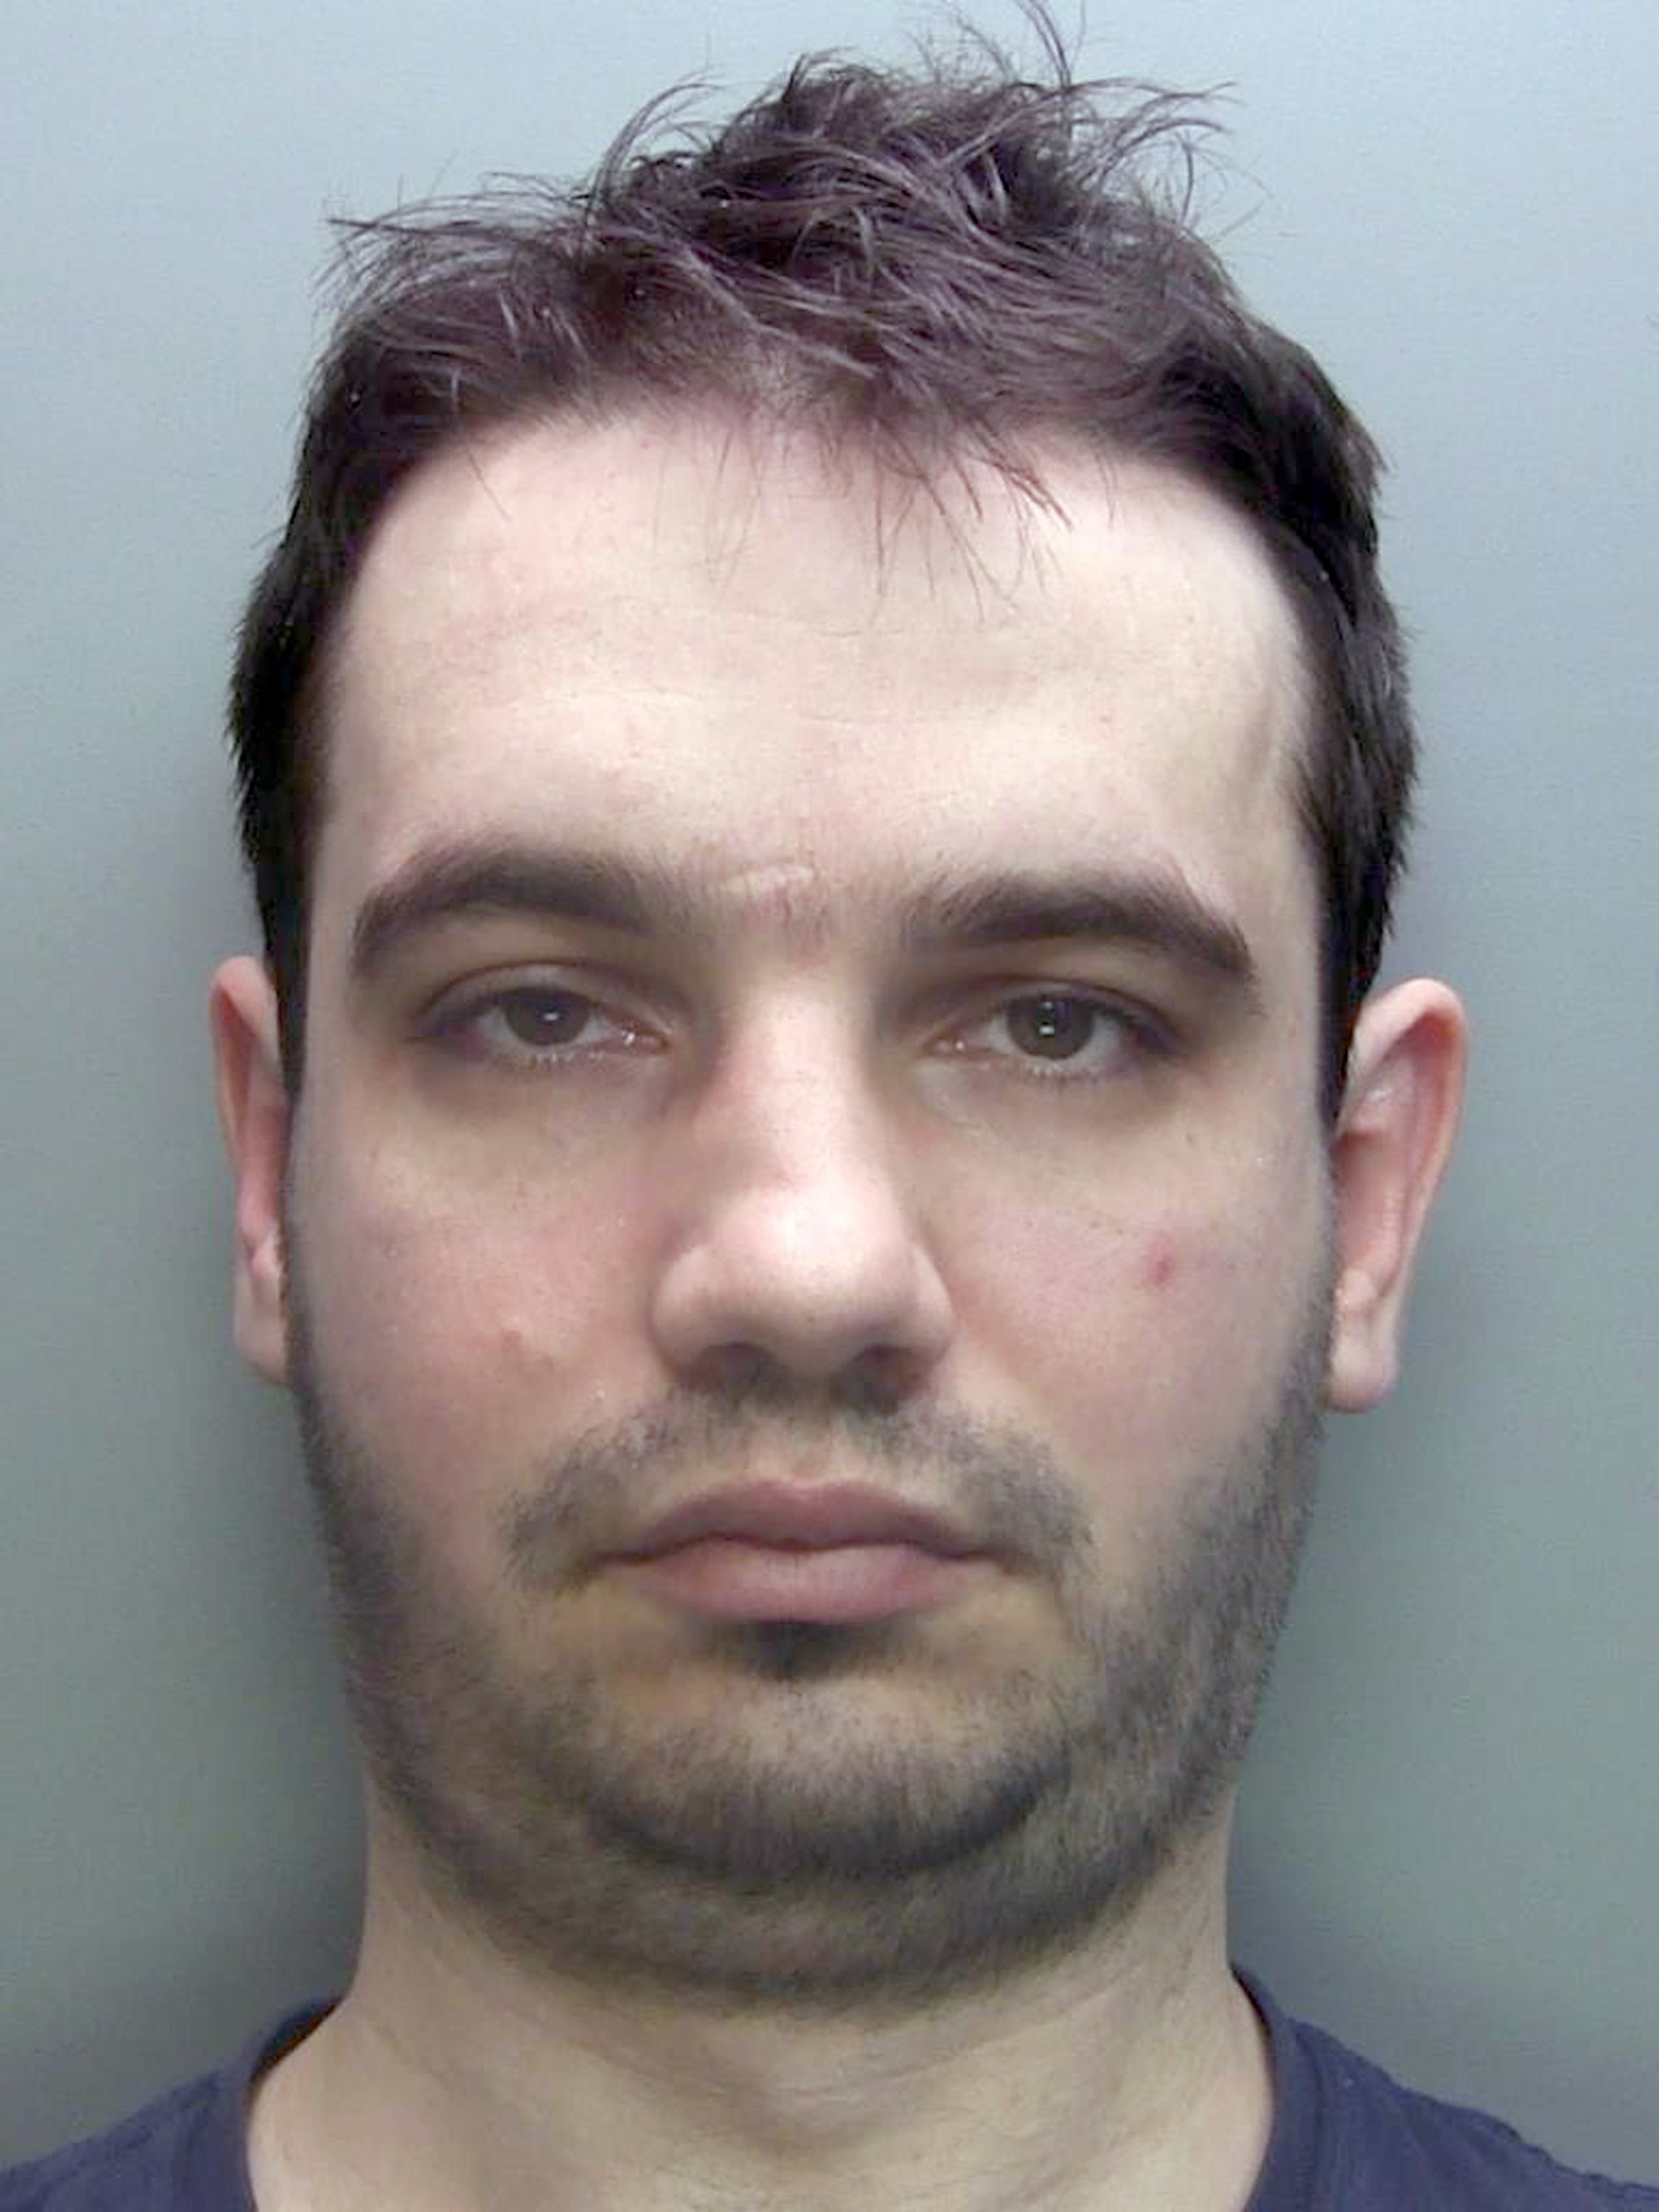 Ion Ciucur, 30, of Gretna, Dumfries and Galloway, Scotland, was sentenced to five years and eight months